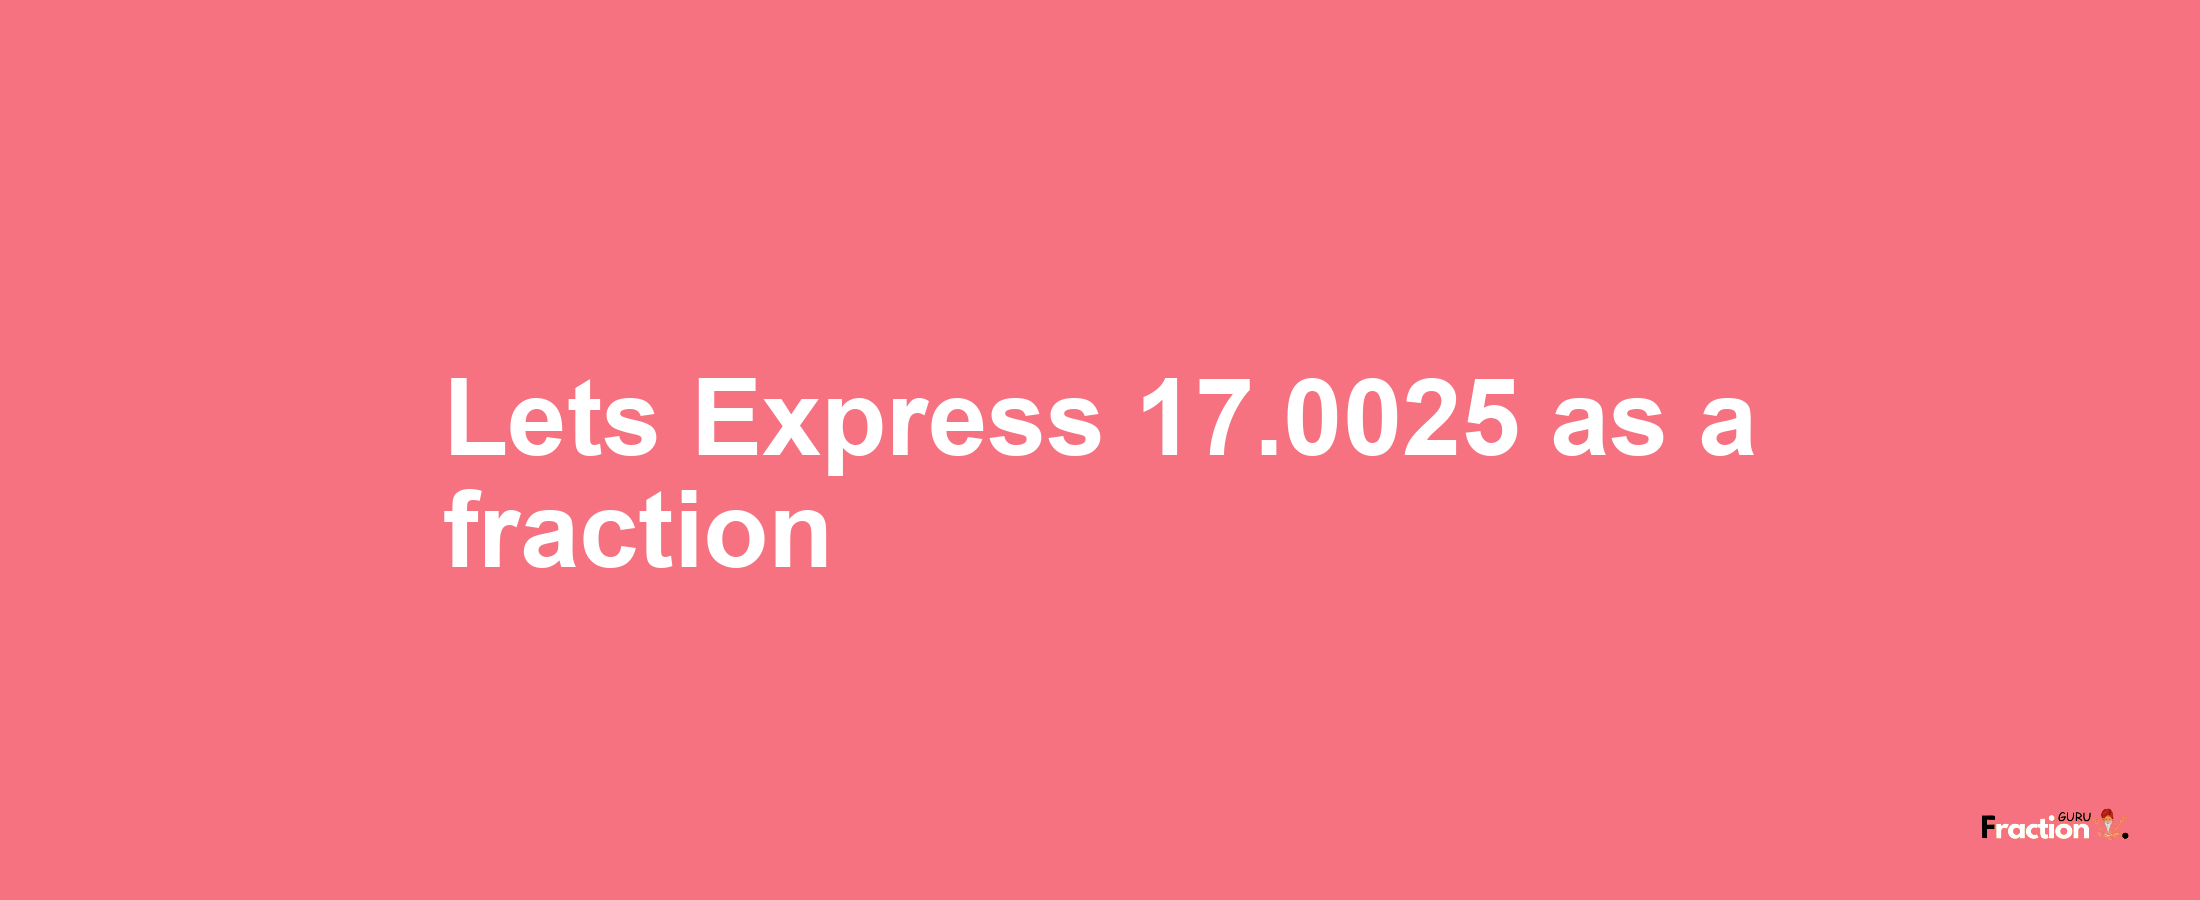 Lets Express 17.0025 as afraction